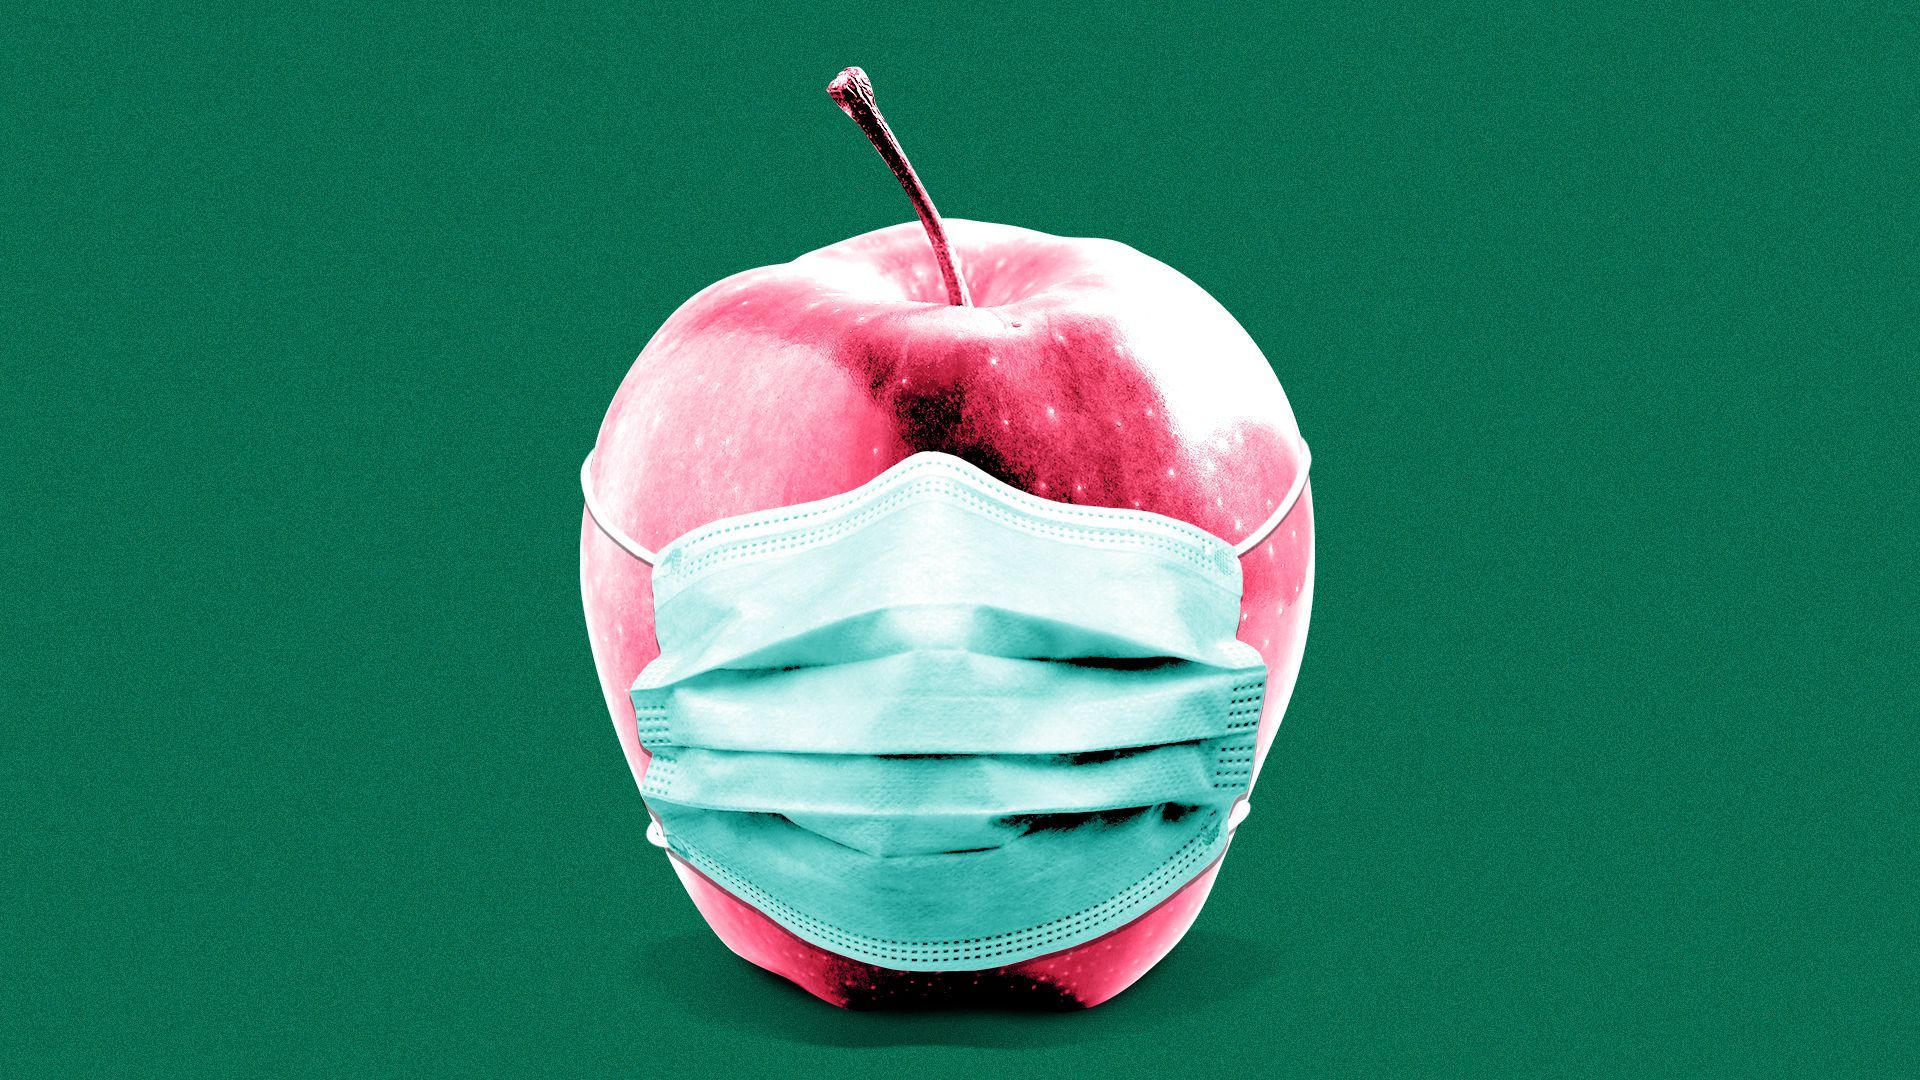 Illustration of an apple wearing a covid mask.